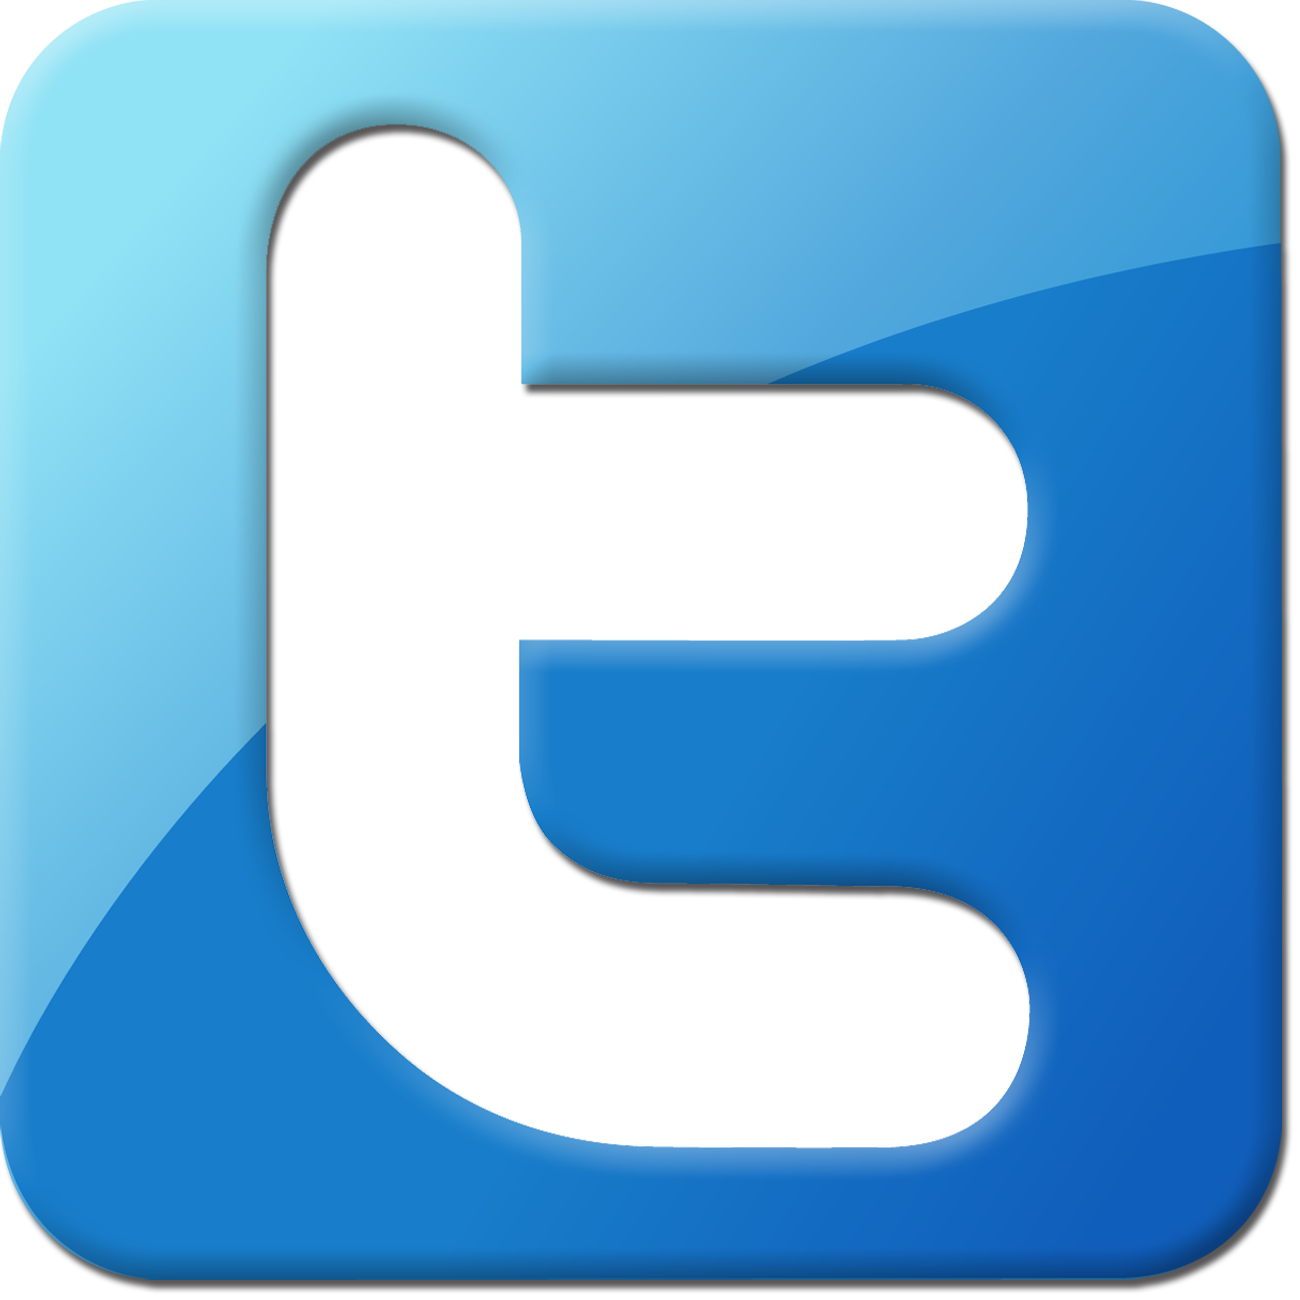 Twitter logo PNG image with t